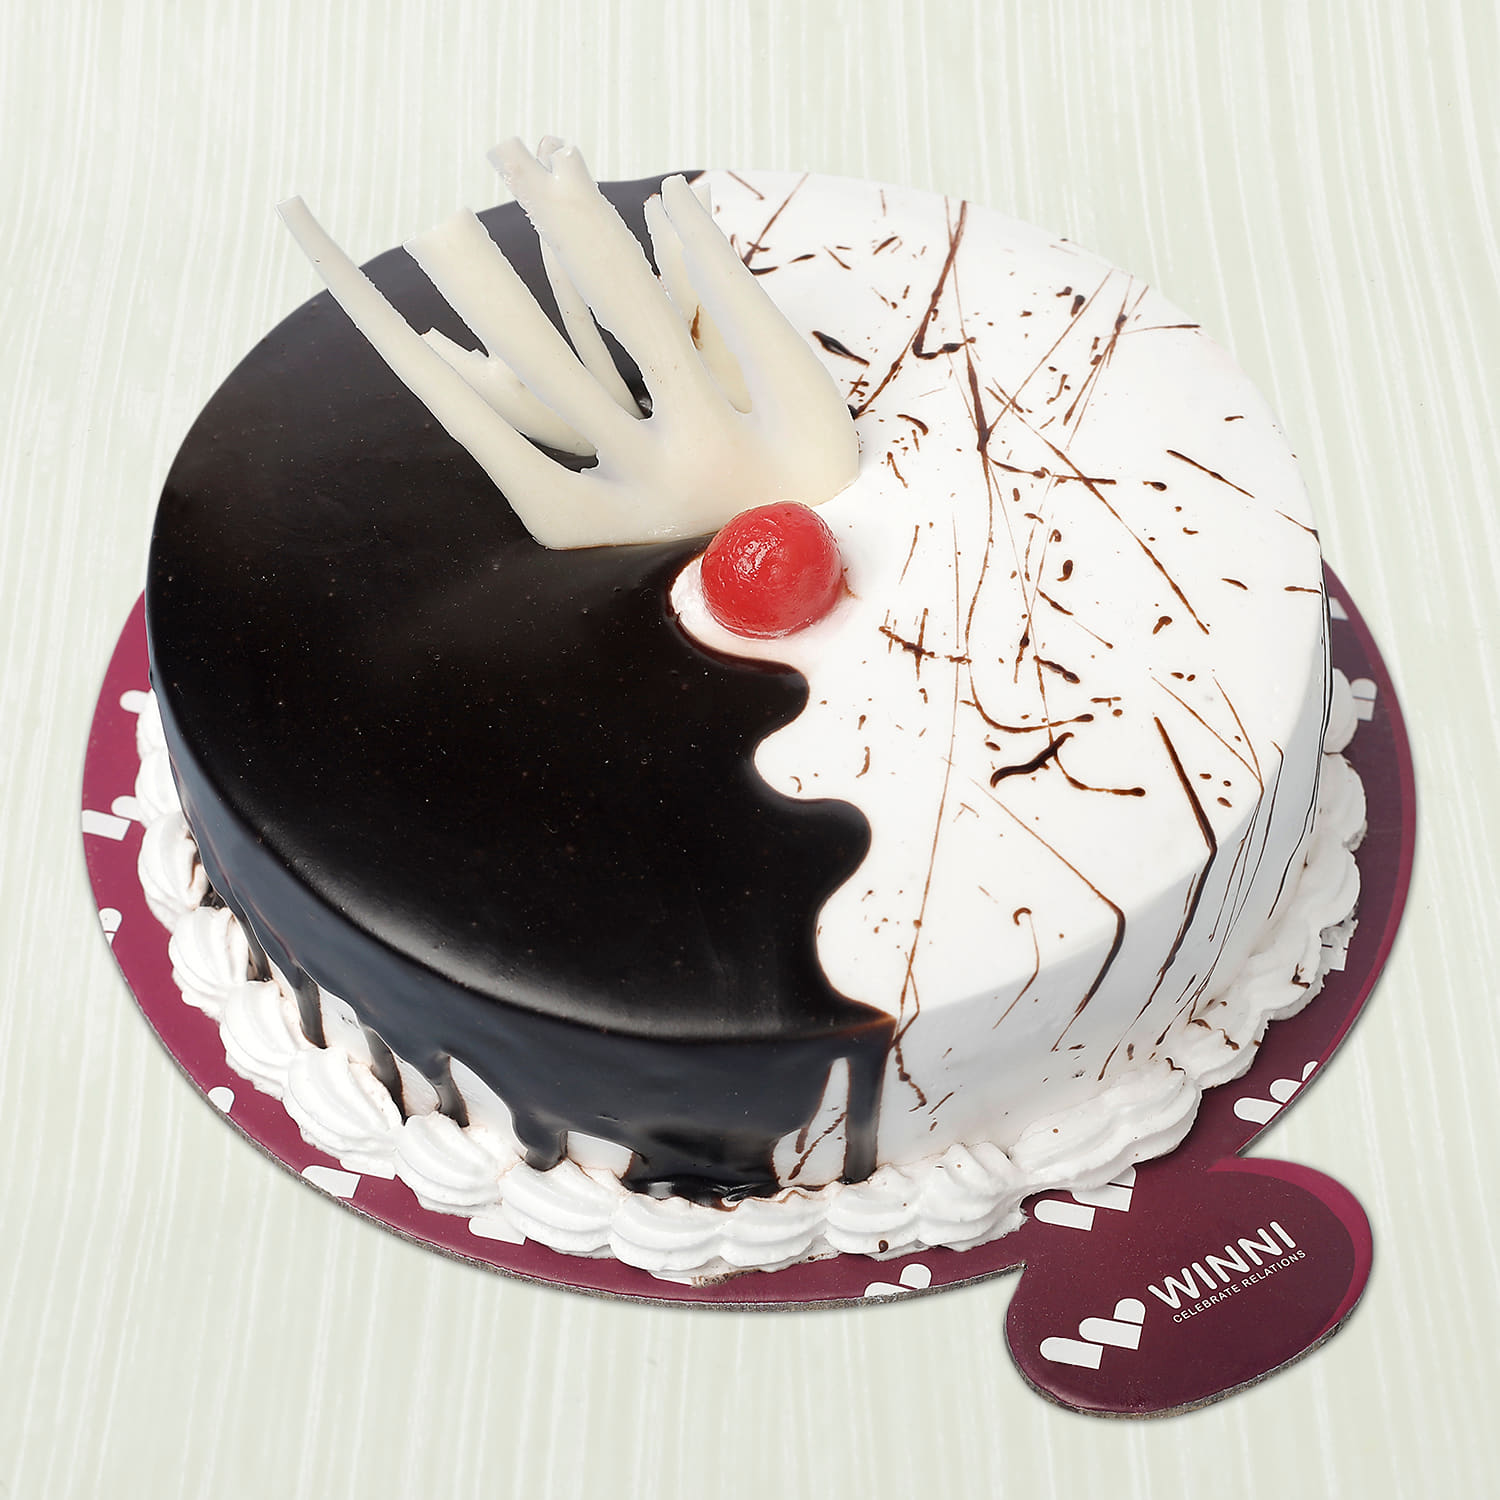 Fusion Red Velvet and Chocolate Cake | Winni.in